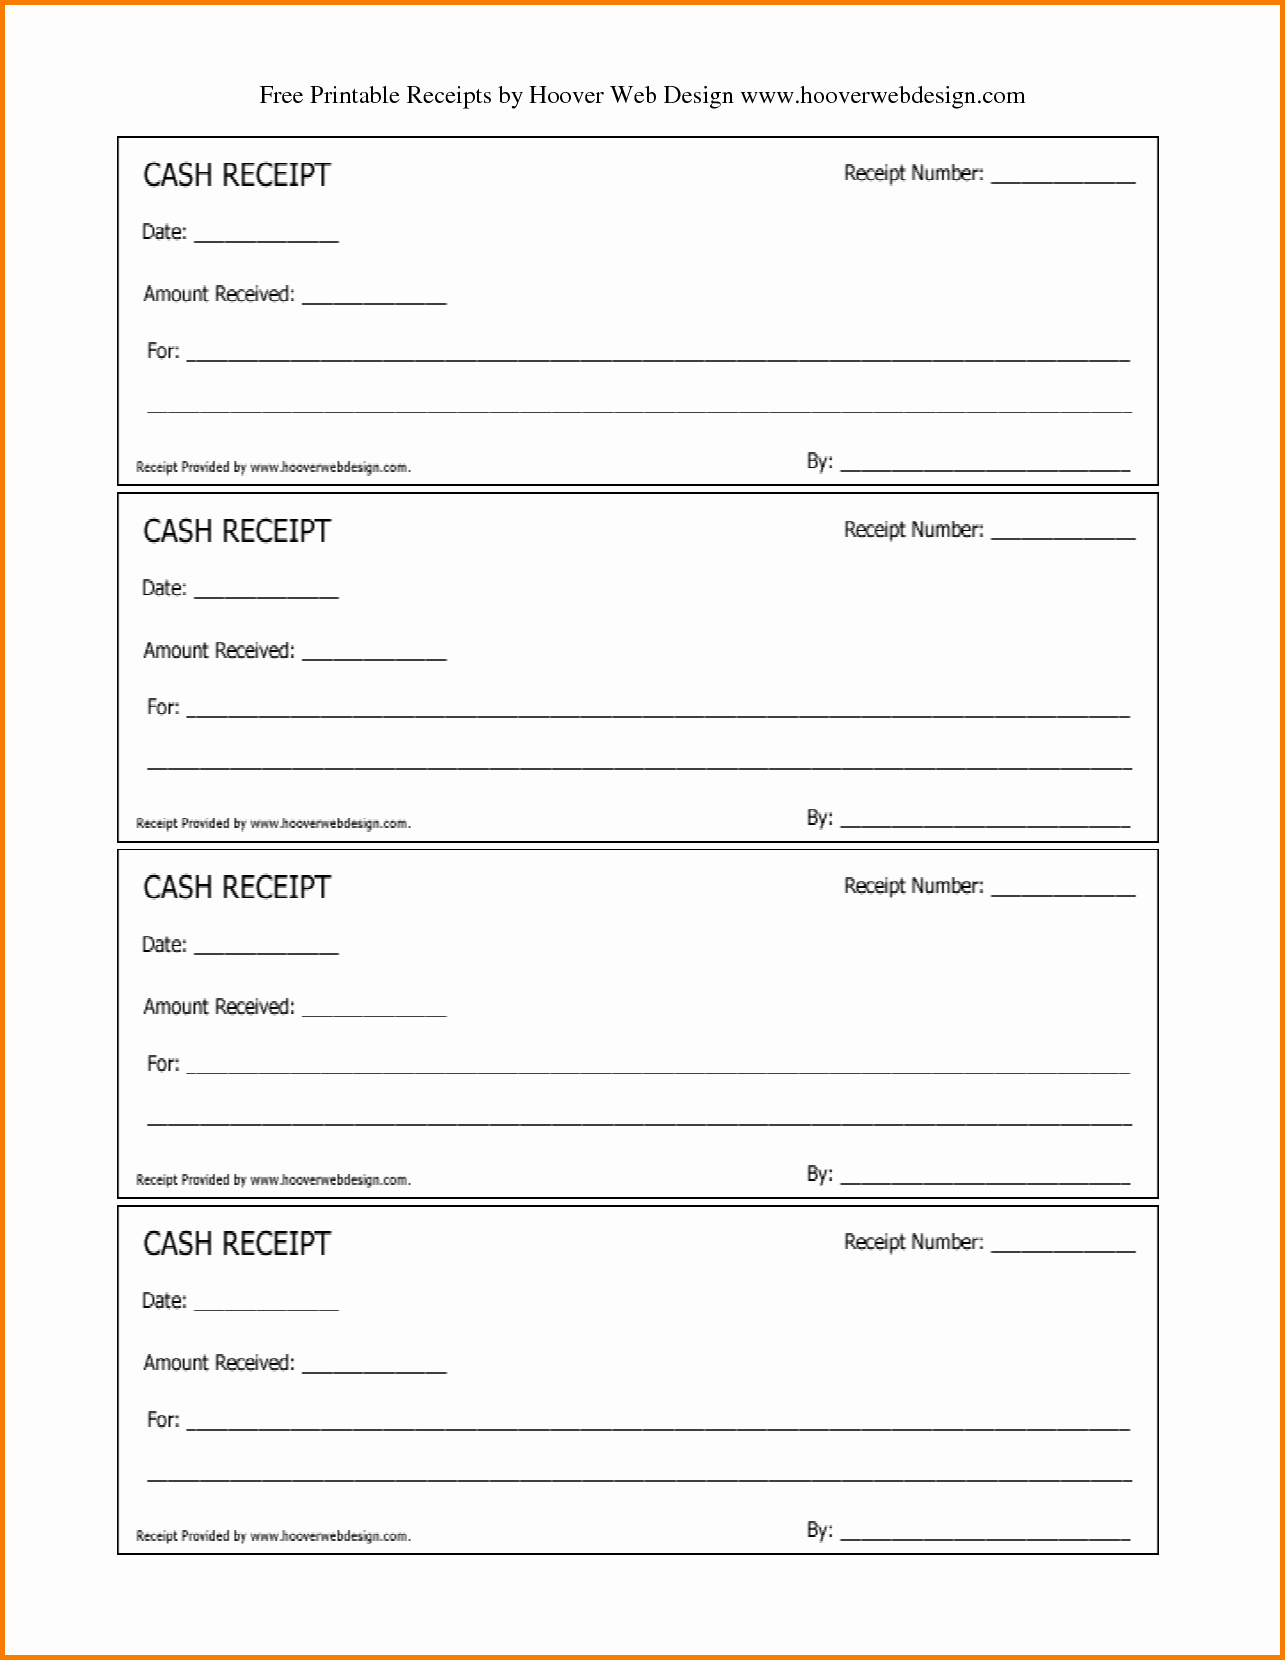 Receipt for Services Template Free New Blank Receipt form Example Mughals